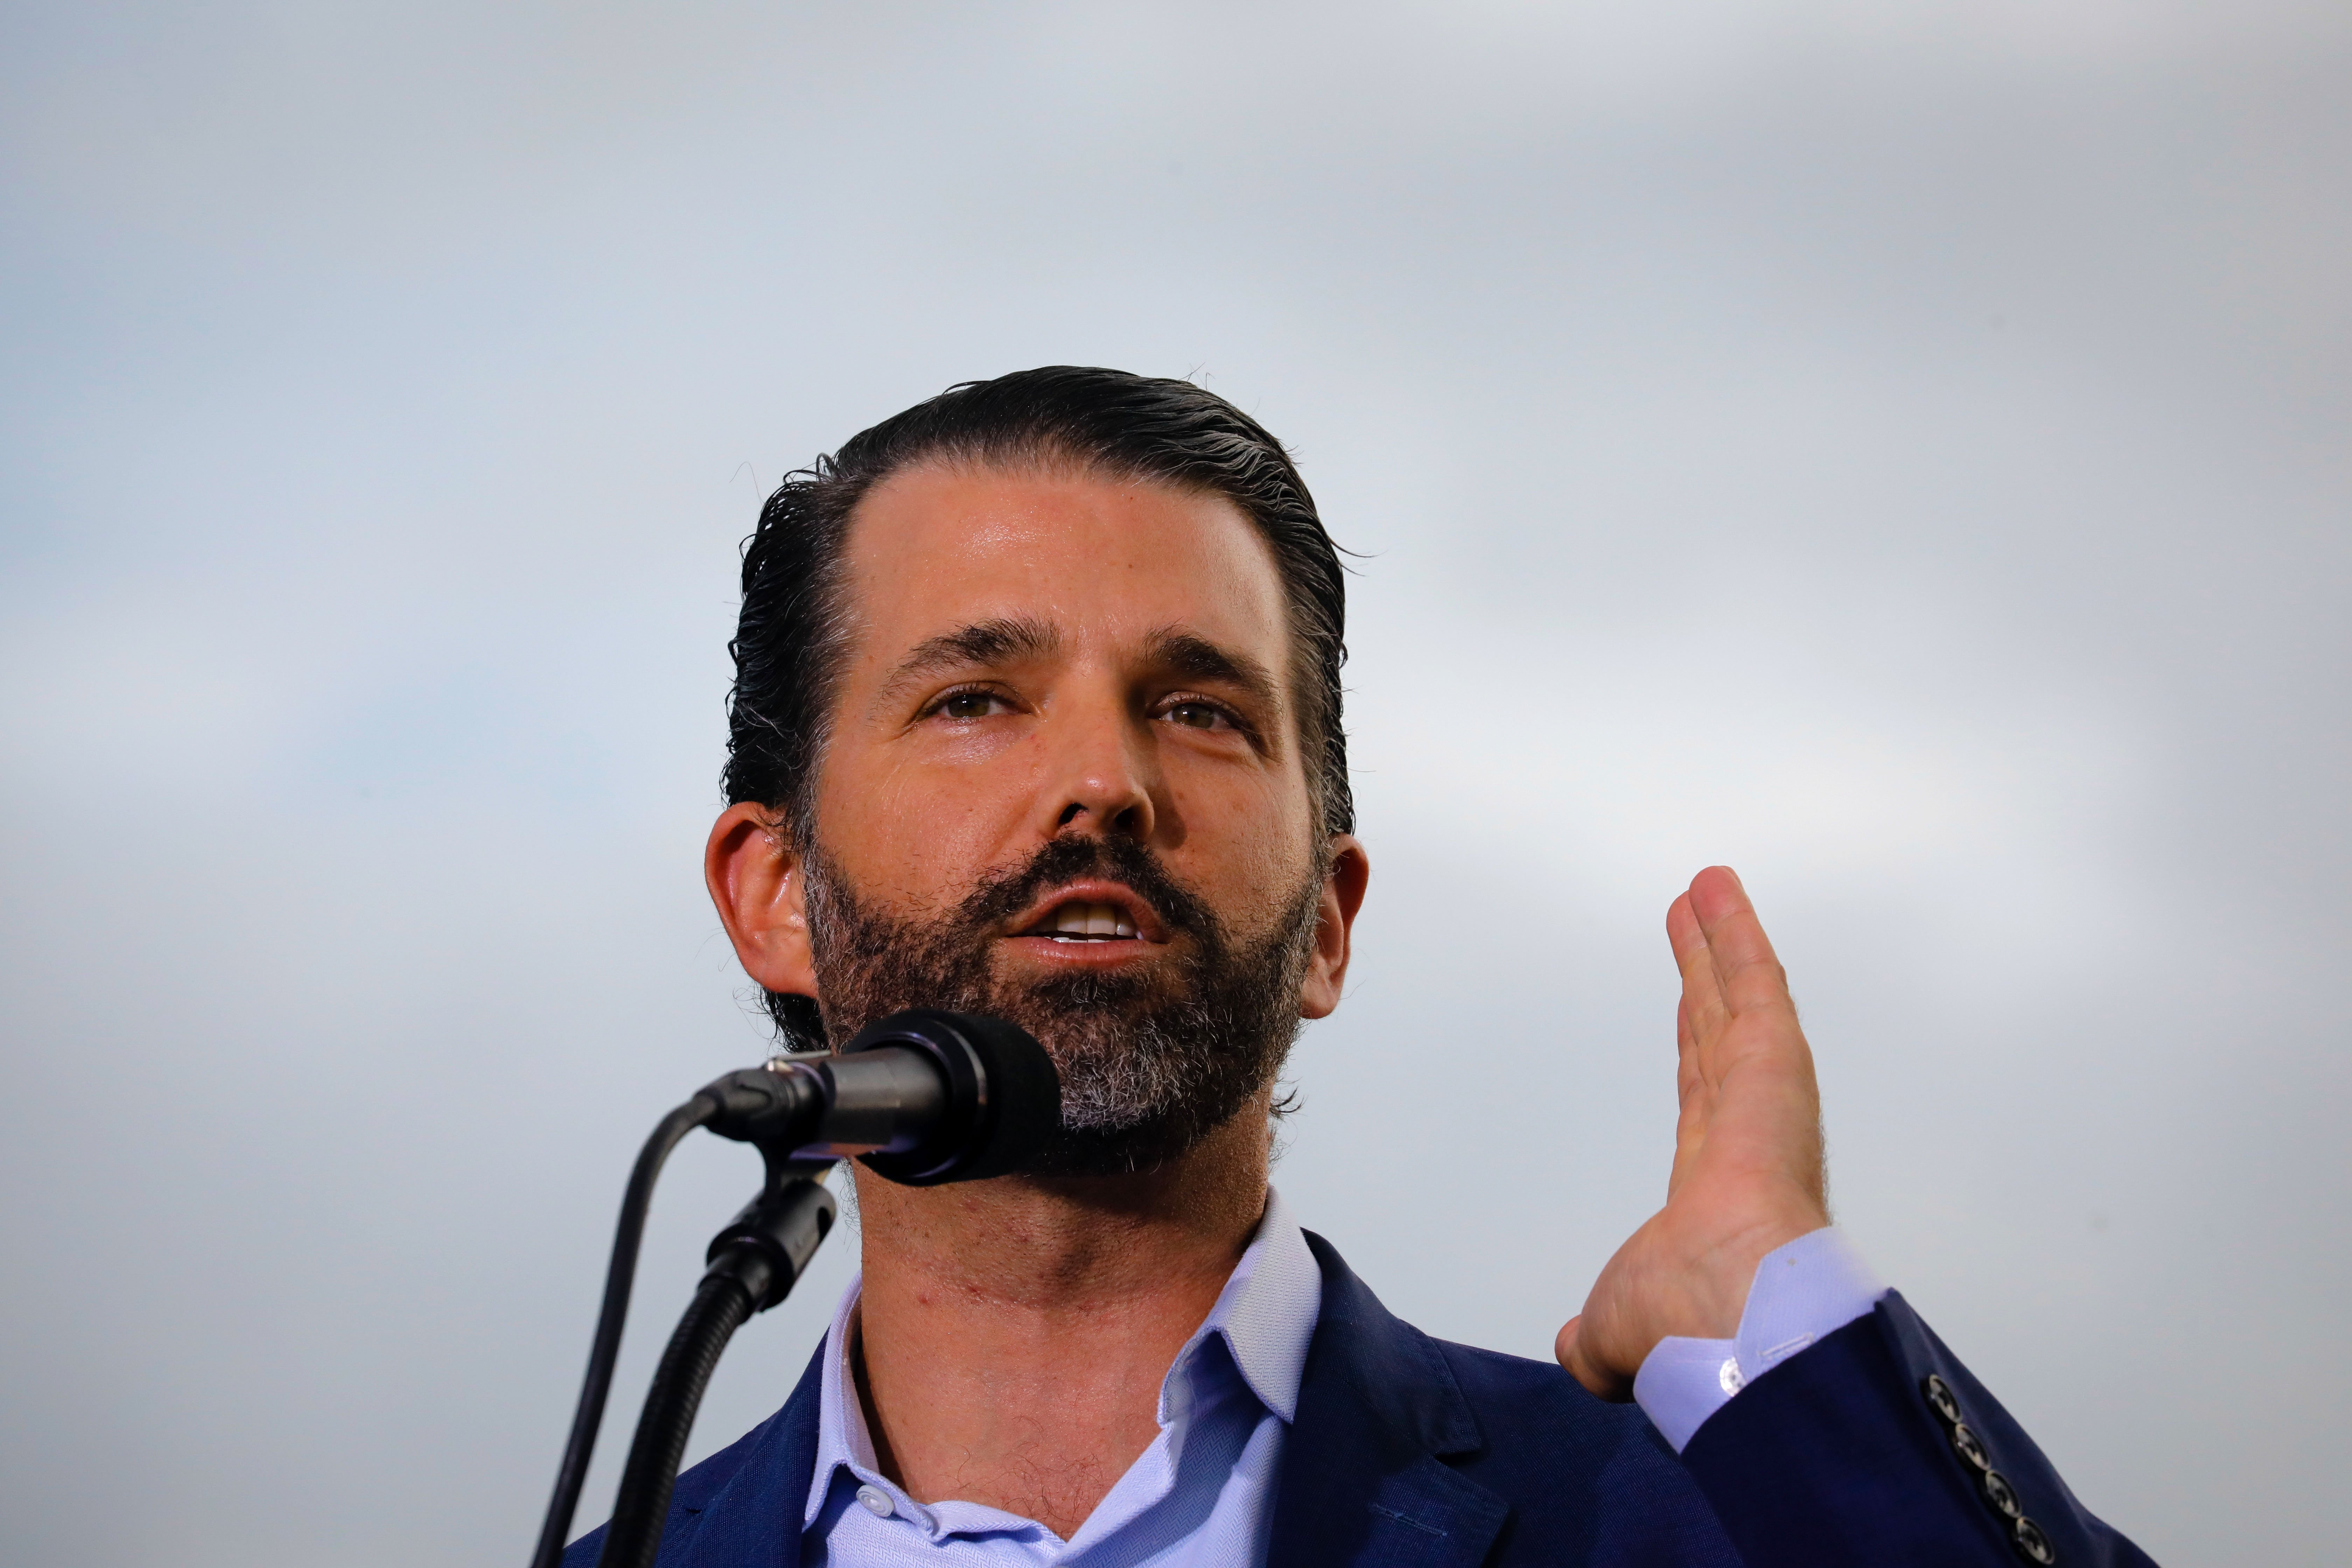 Former TV presenter, Donald J. Trump Jr. speaking during a rally on July 3, 2021 in Sarasota, Florida.┃Source: Getty Images